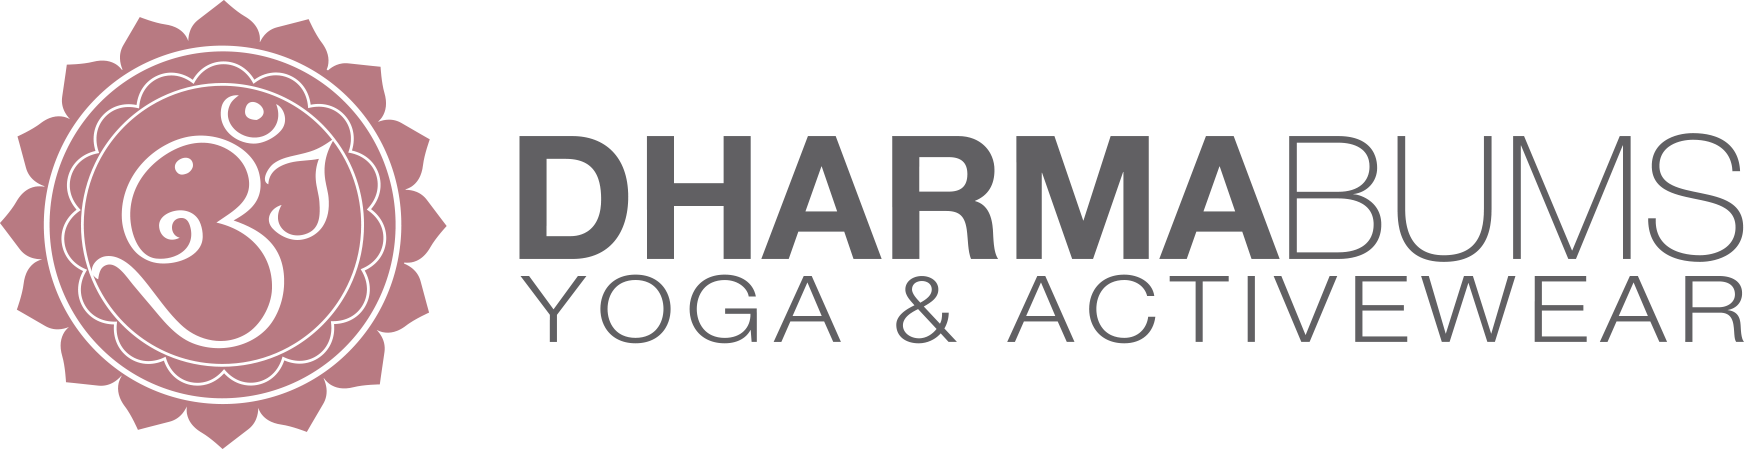 Women's Yoga and Activewear Clothing Online | Dharma Bums